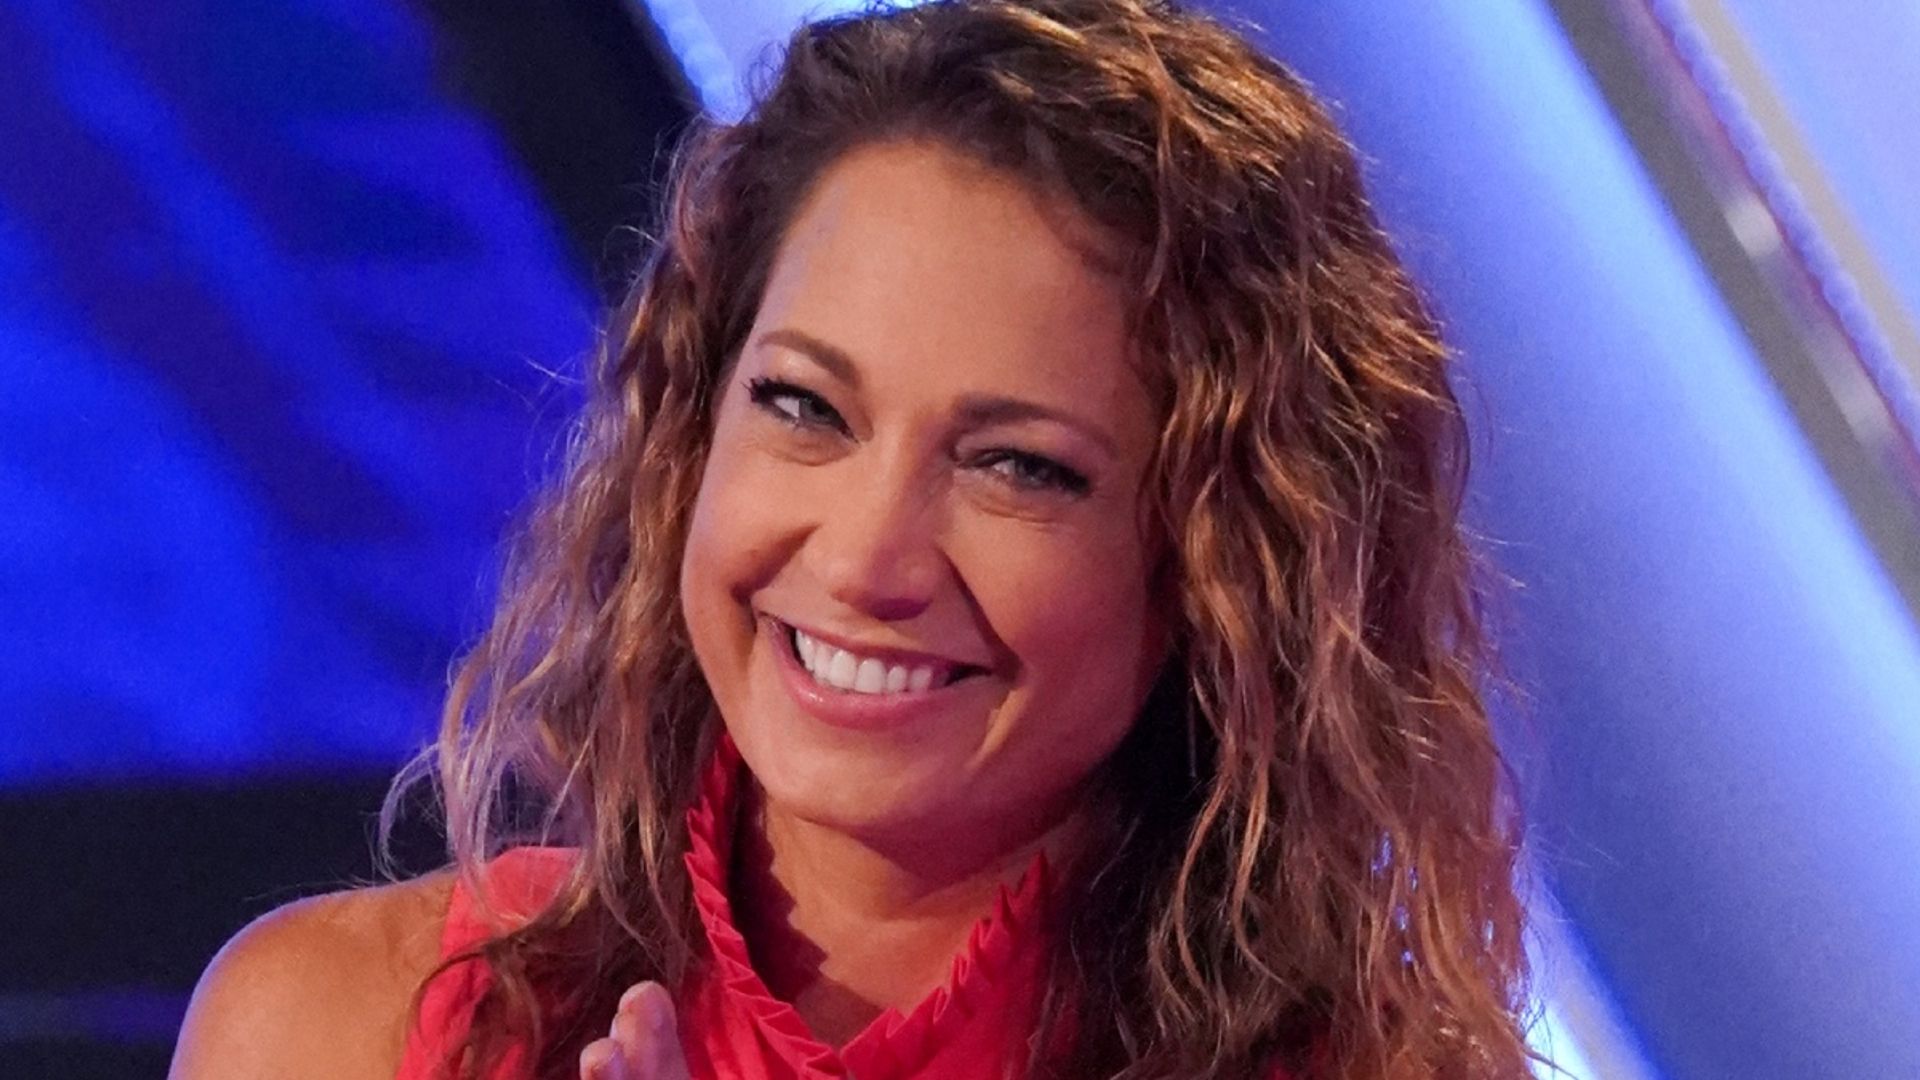 Ginger Zee's pre-show warm up leaves fans in hysterics